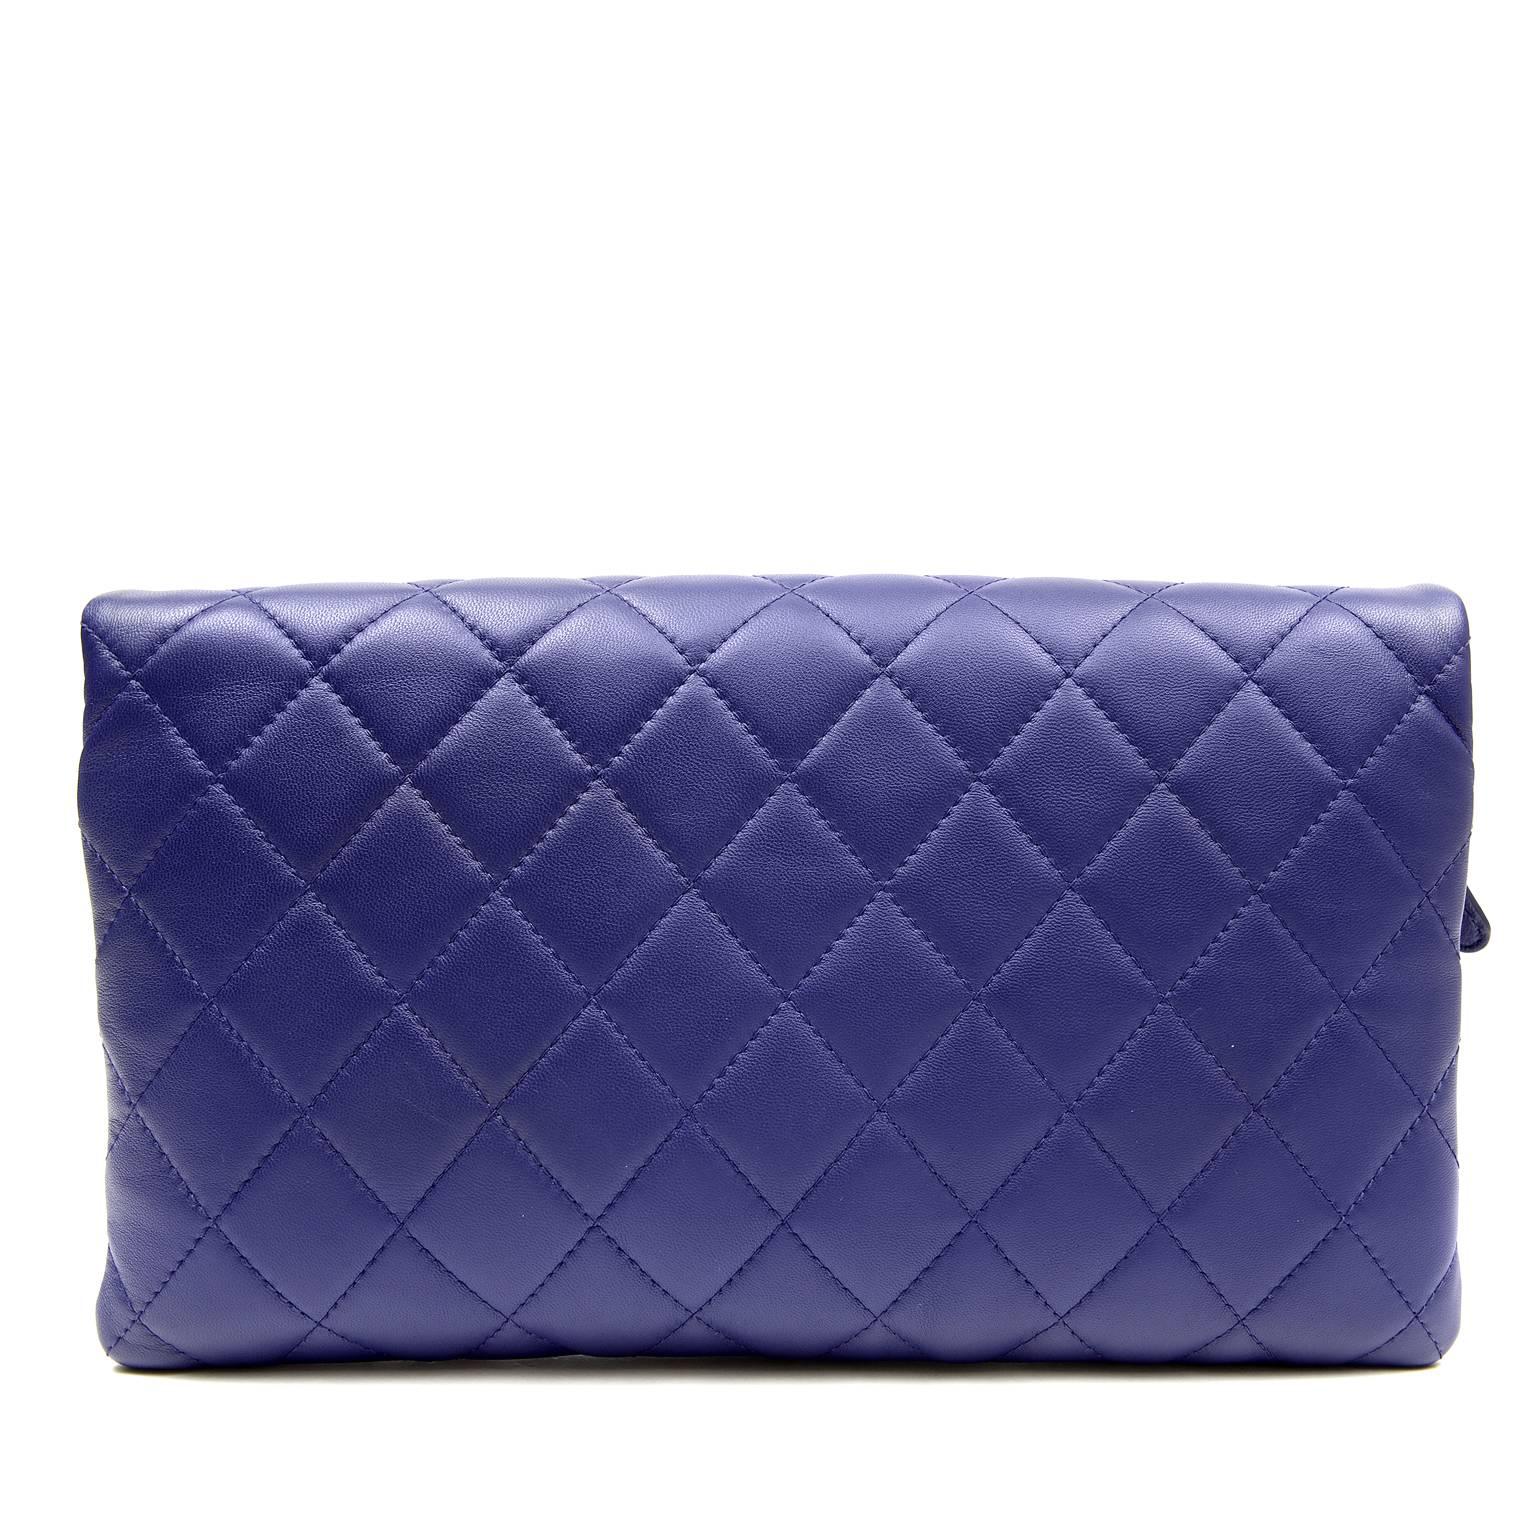 Chanel Purple Leather Clutch- PRISTINE, unworn condition.
 The fold over style features two separate zippered pouches that easily hold all the essentials for an evening out.
Regal purple leather is quilted in signature Chanel diamond stitched